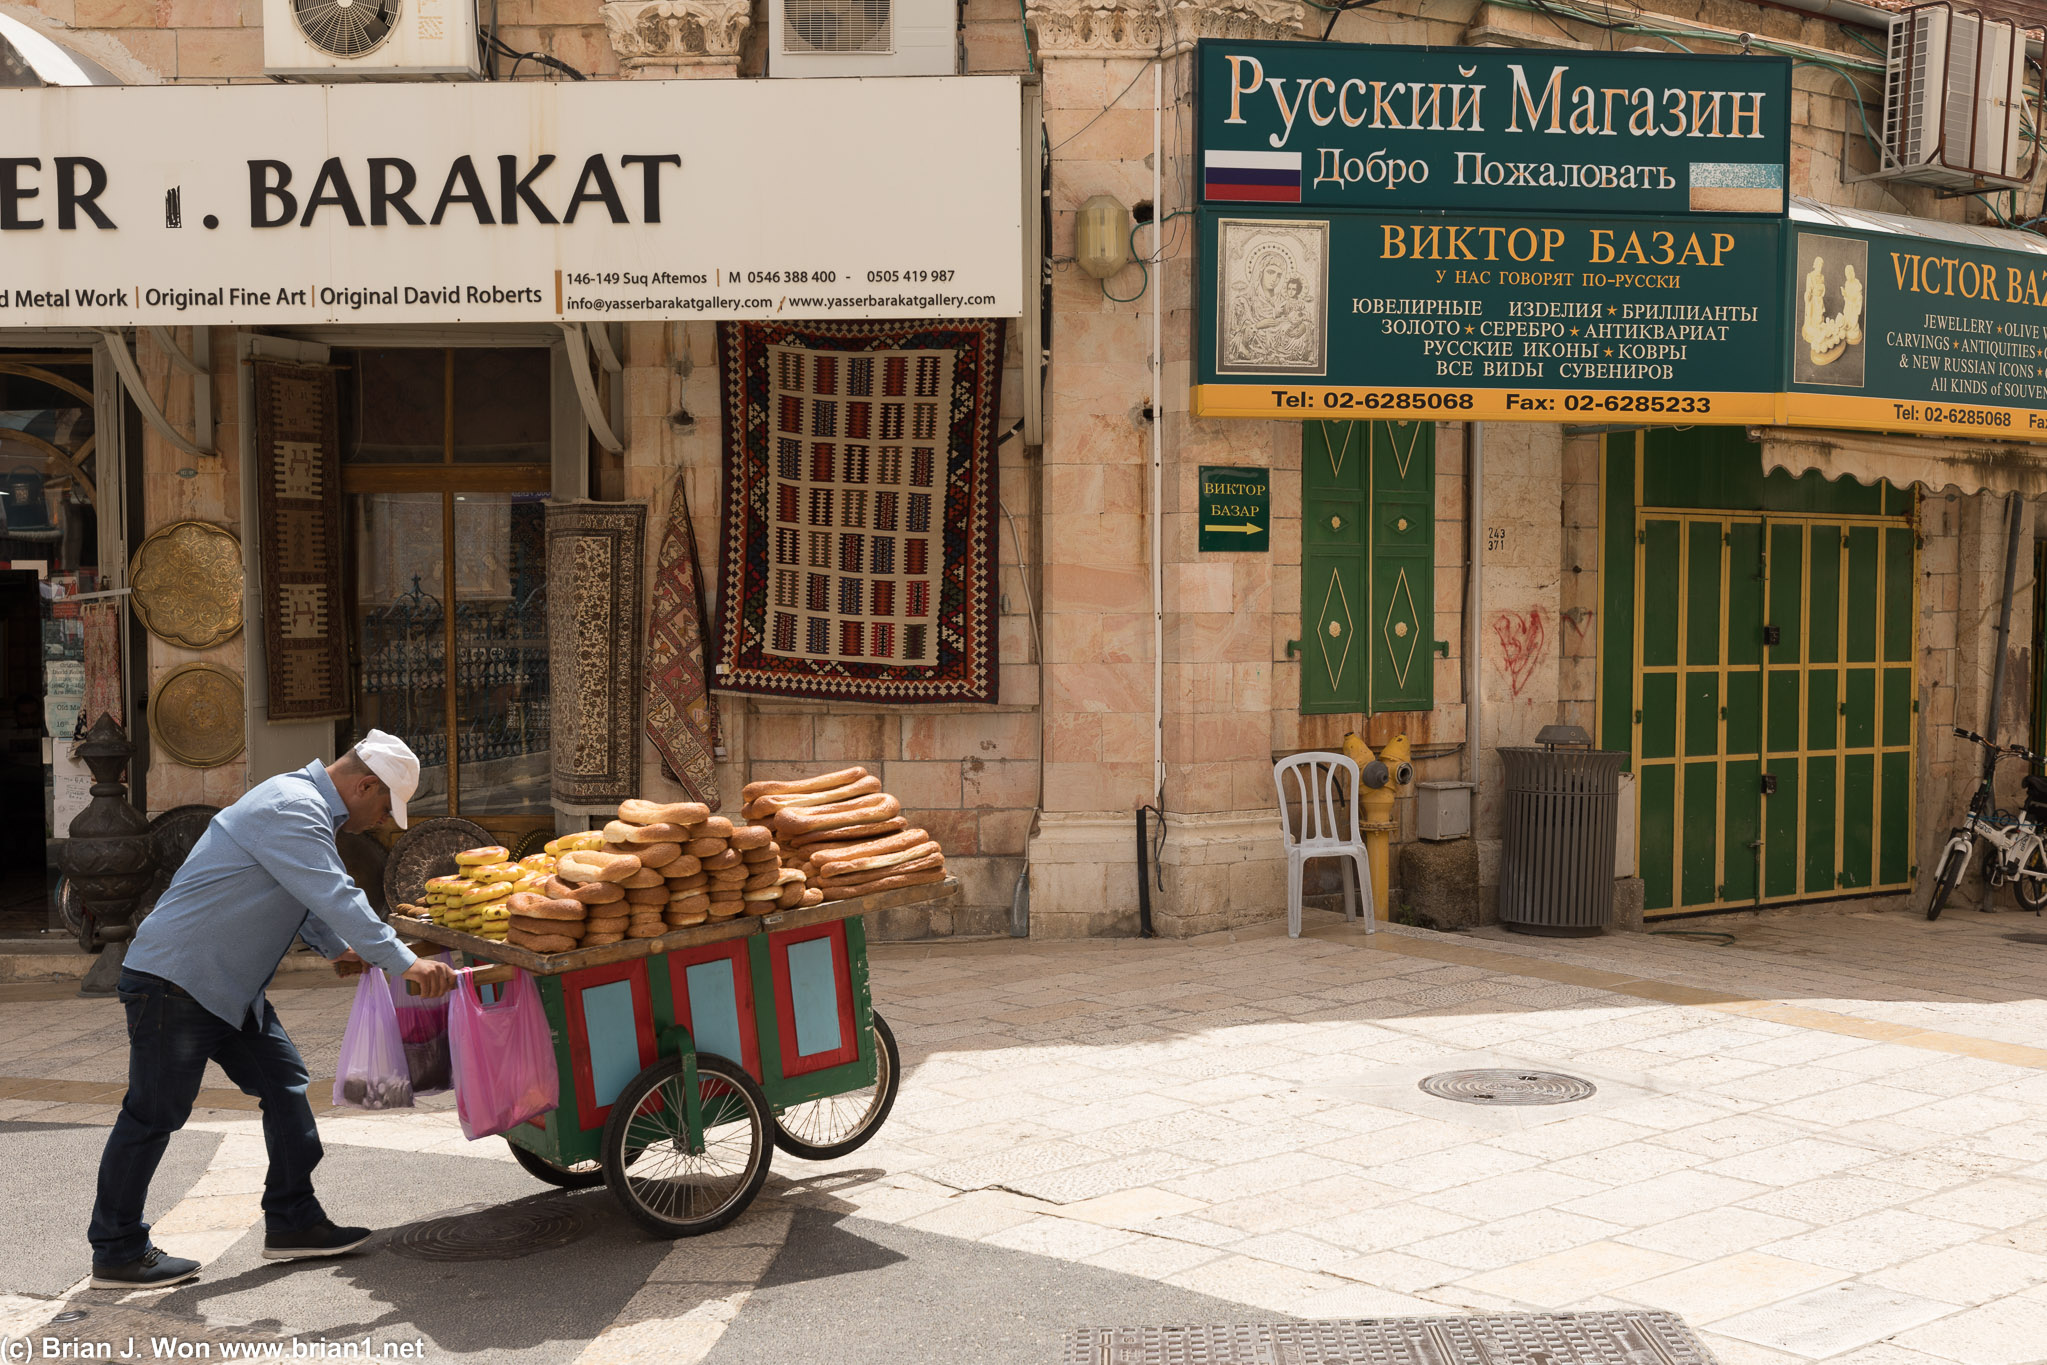 Bread seller setting up for the day.